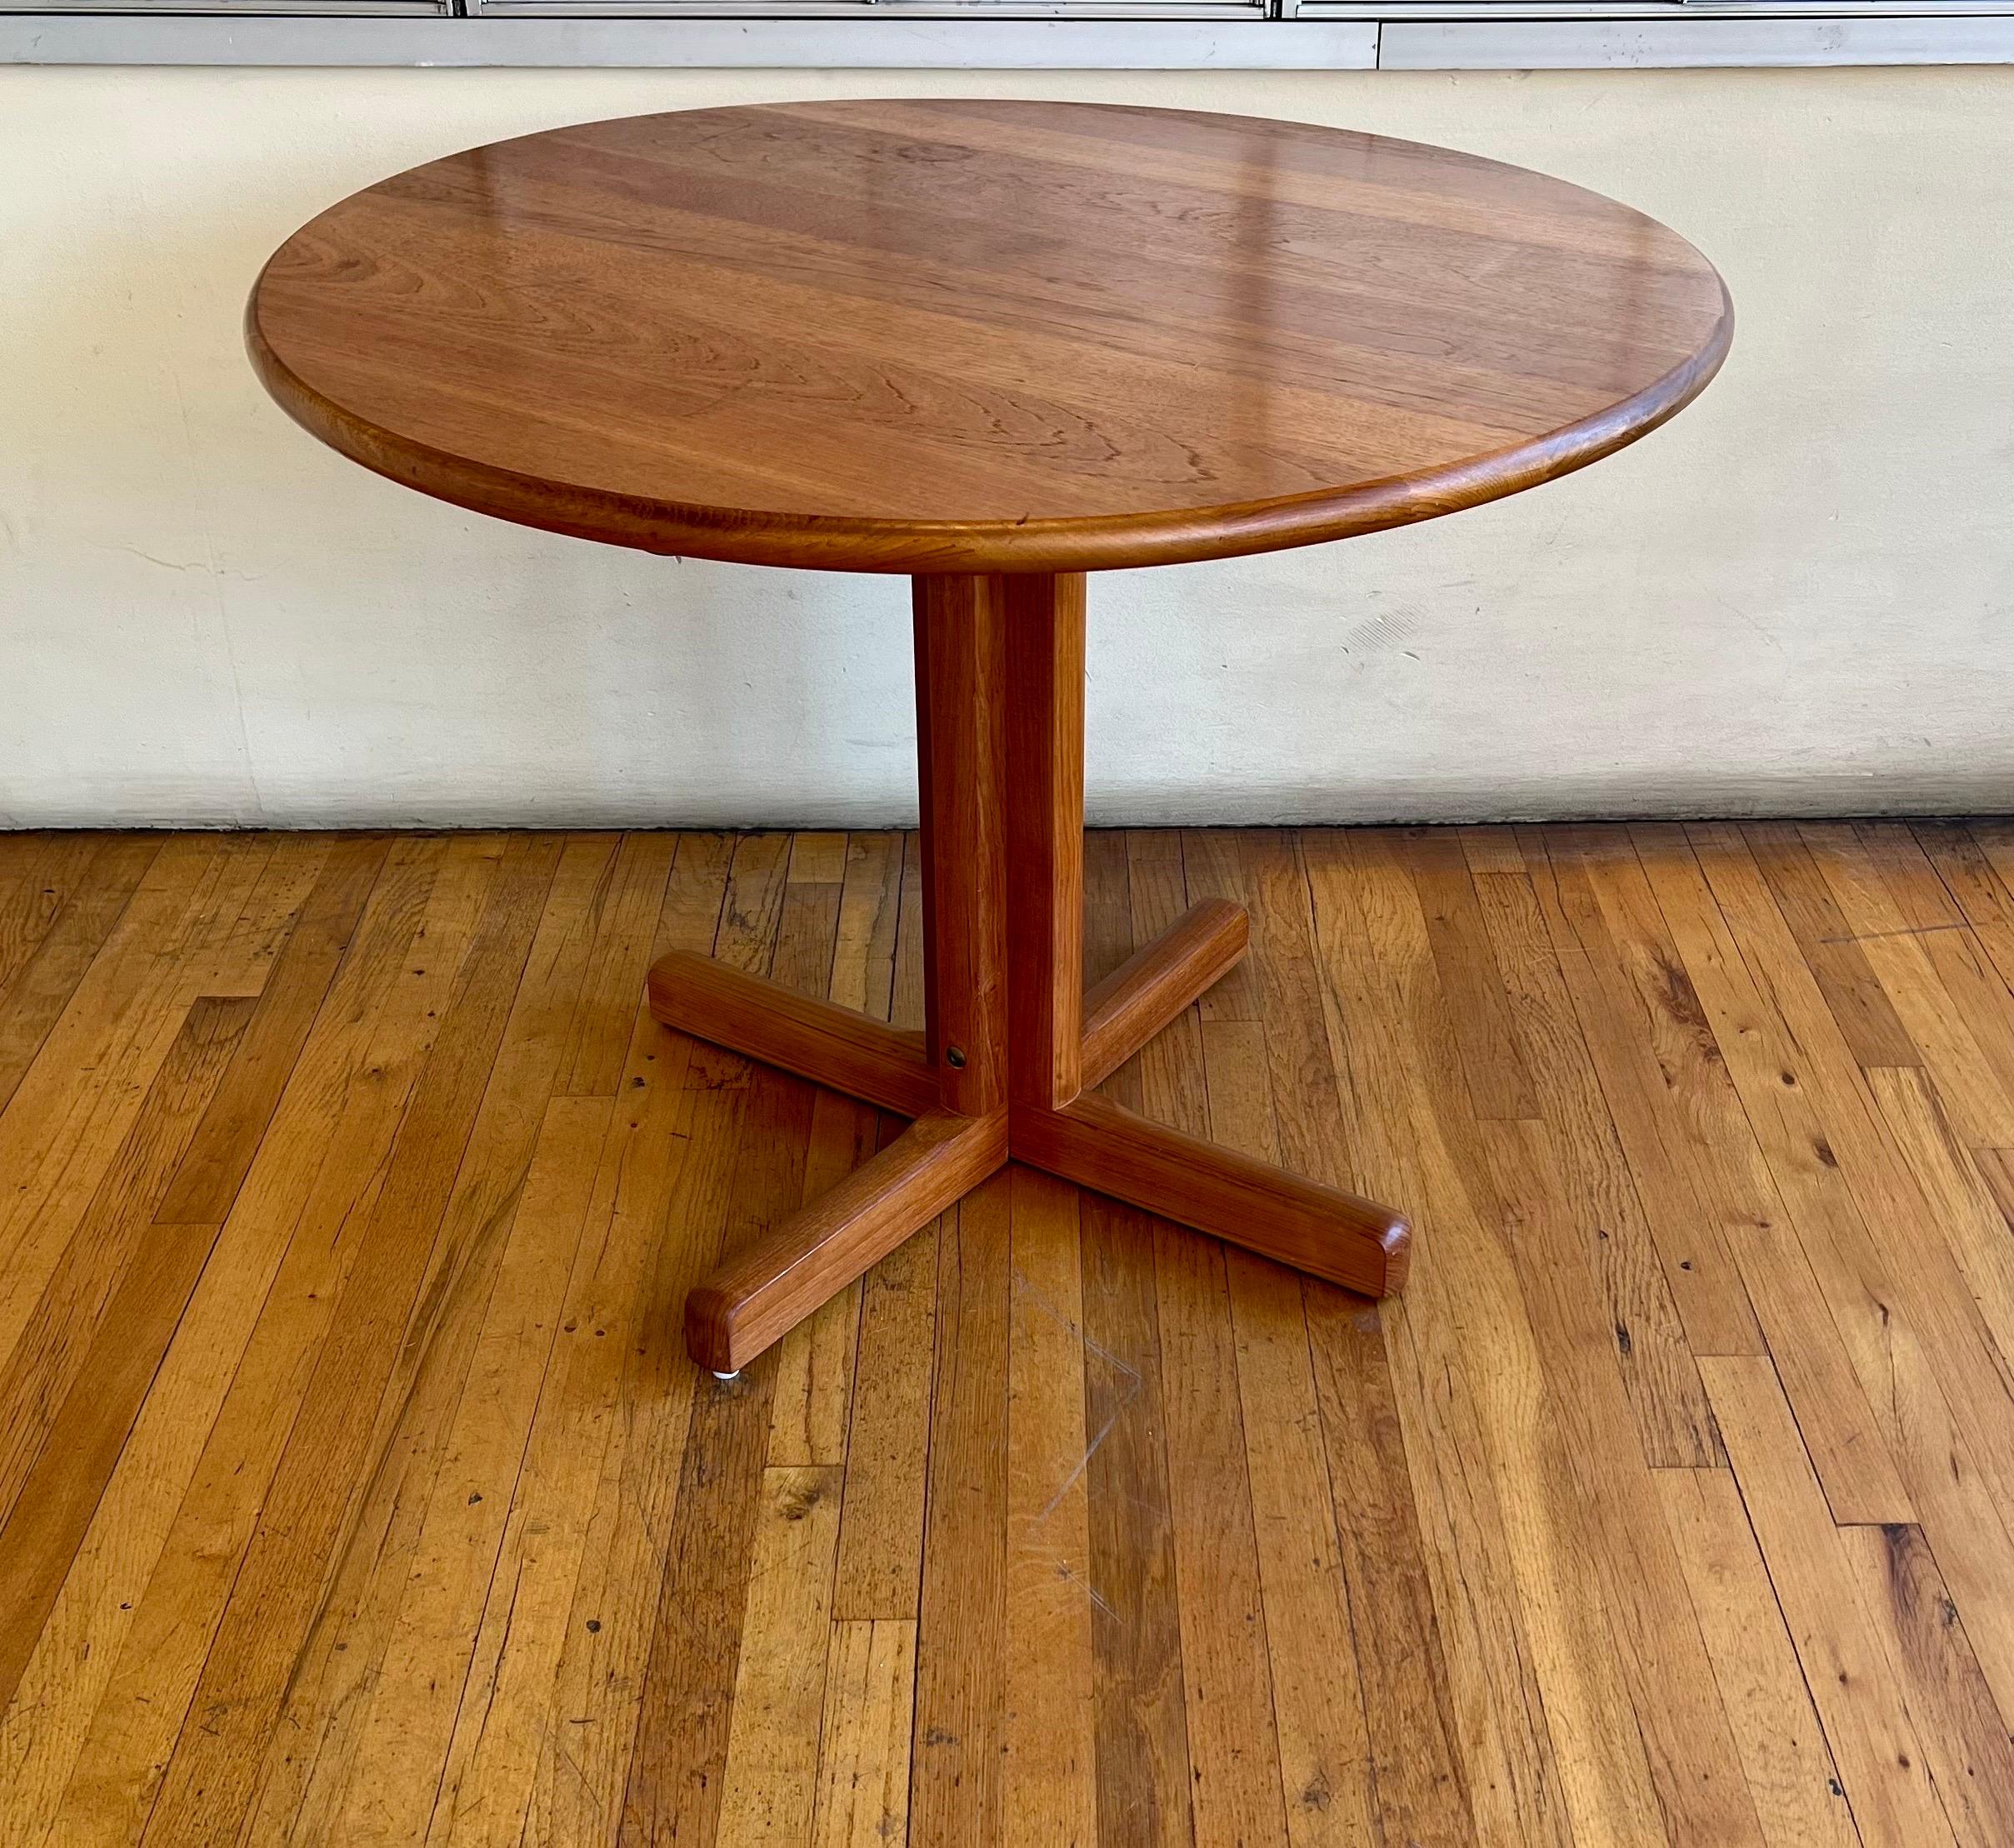 Beautiful simple elegant design on this solid teak small dining table, designed by Erik Ole Jorgensen, circa the 1980s, freshly refinished the table top comes off for easy shipping. freshly refinished in great condition.